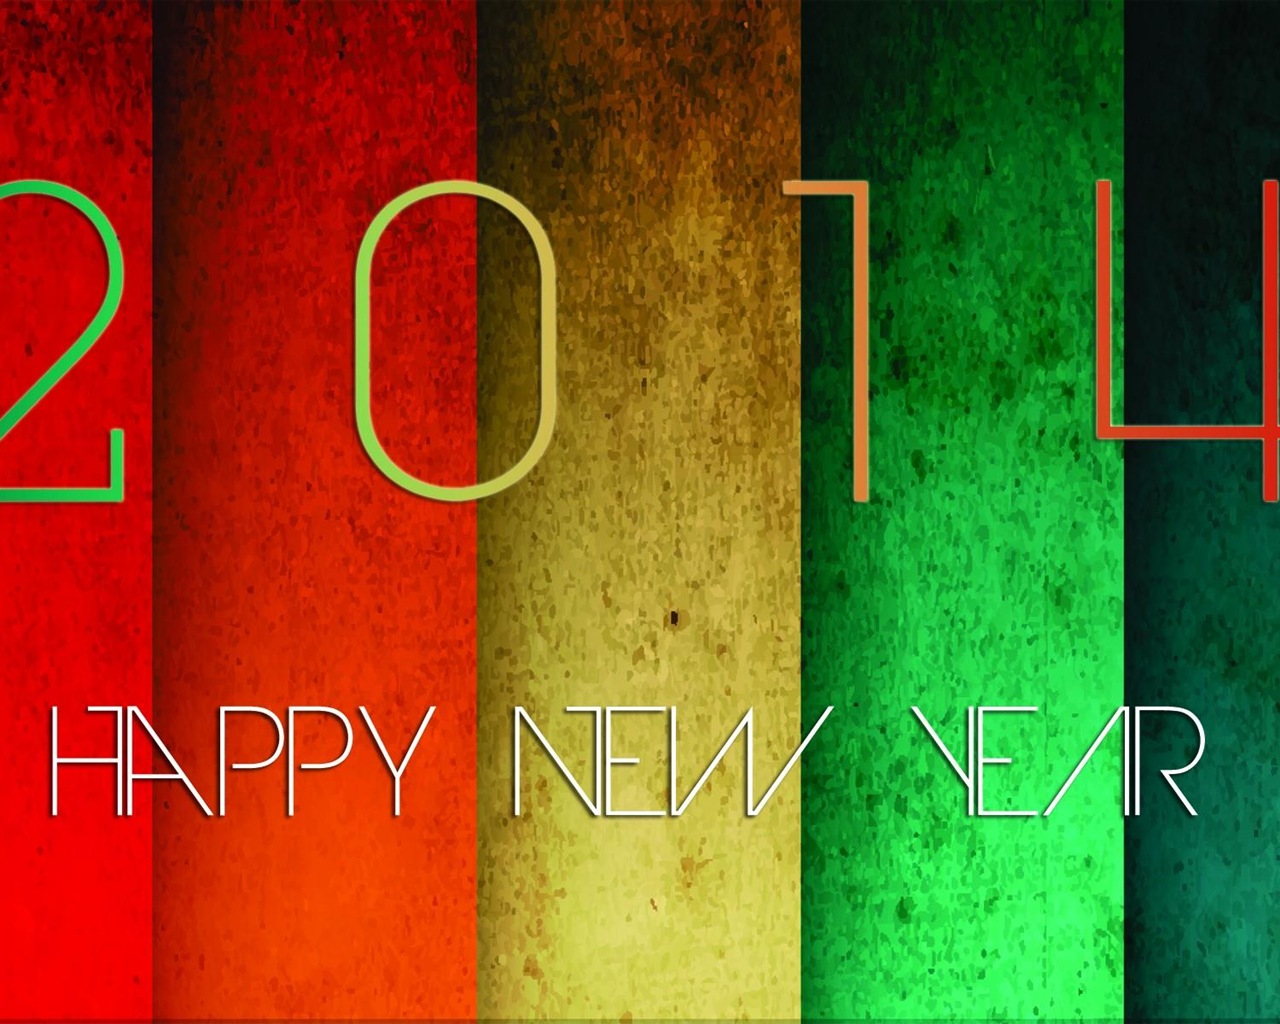 2014 New Year Theme HD Wallpapers (2) #3 - 1280x1024